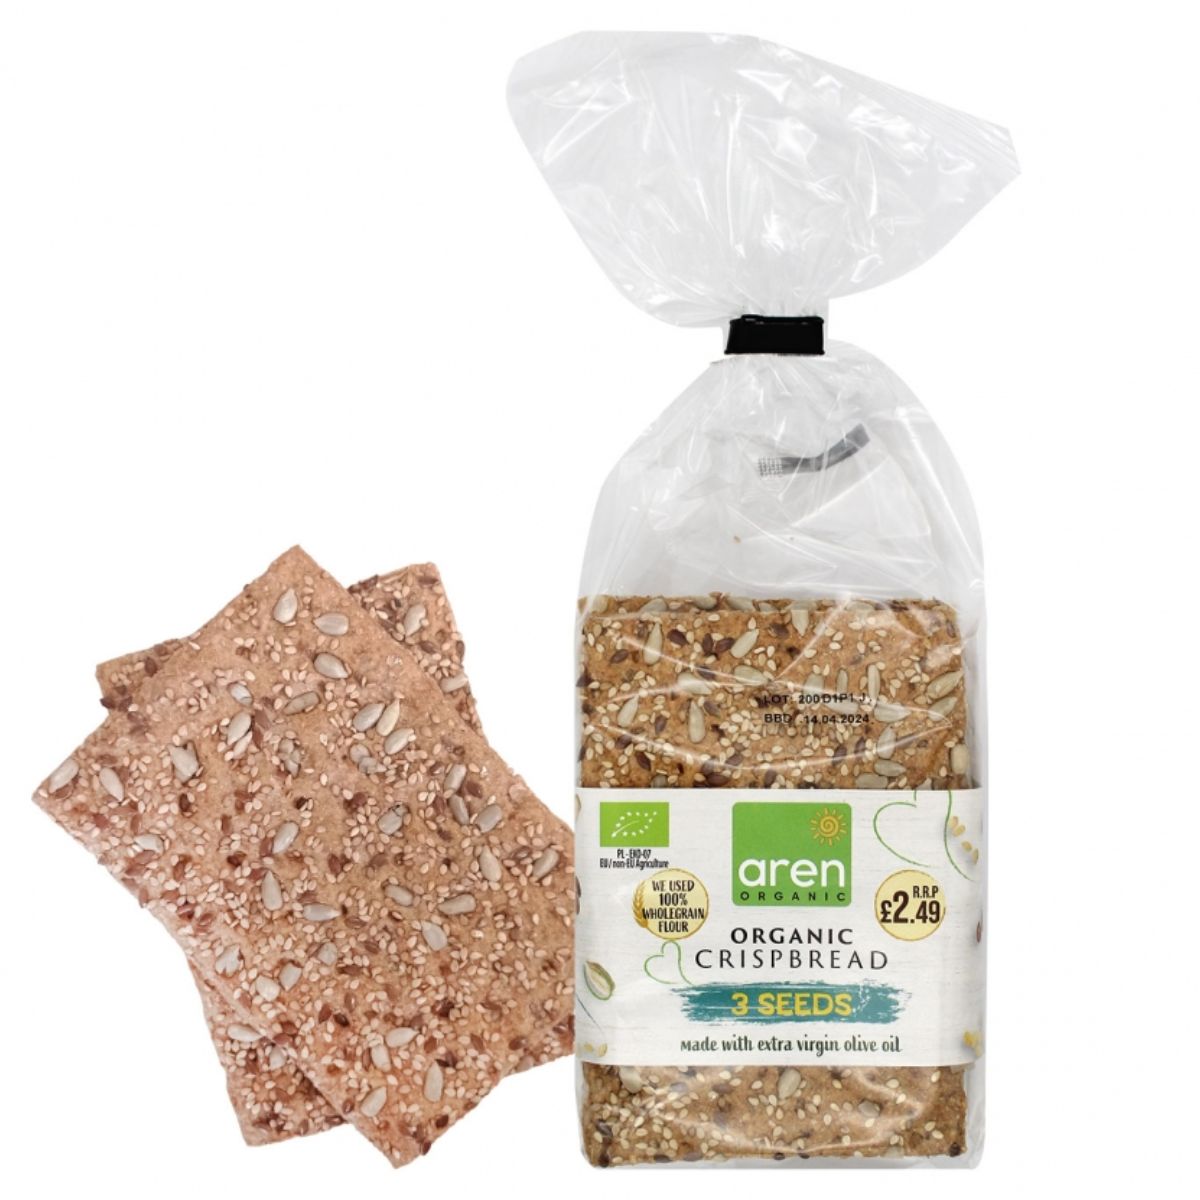 A bag of Lara - Natural Crispbread Protein & 3 Seeds - 200g next to a bag of oats.